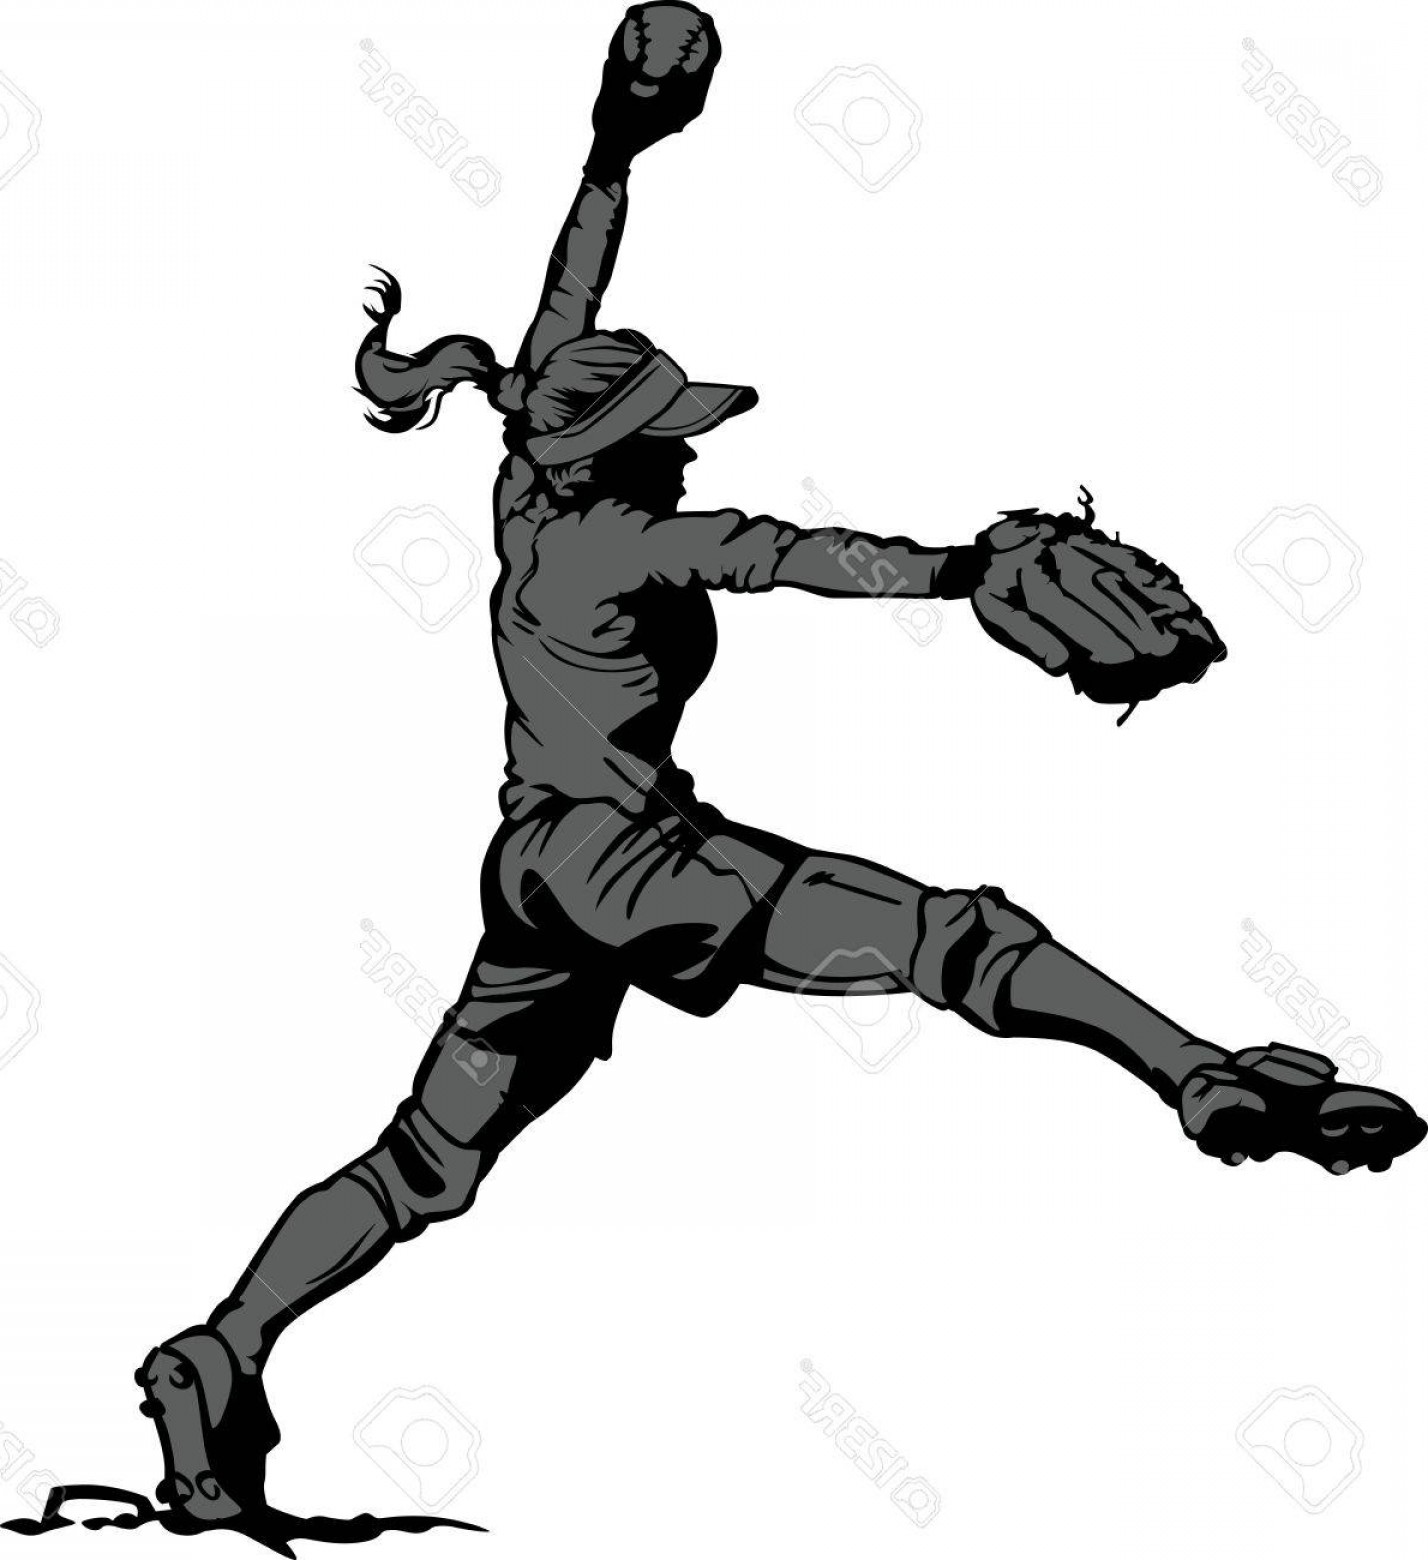 Photovector Illustration Silhouette Of A Fastpitch Softball.